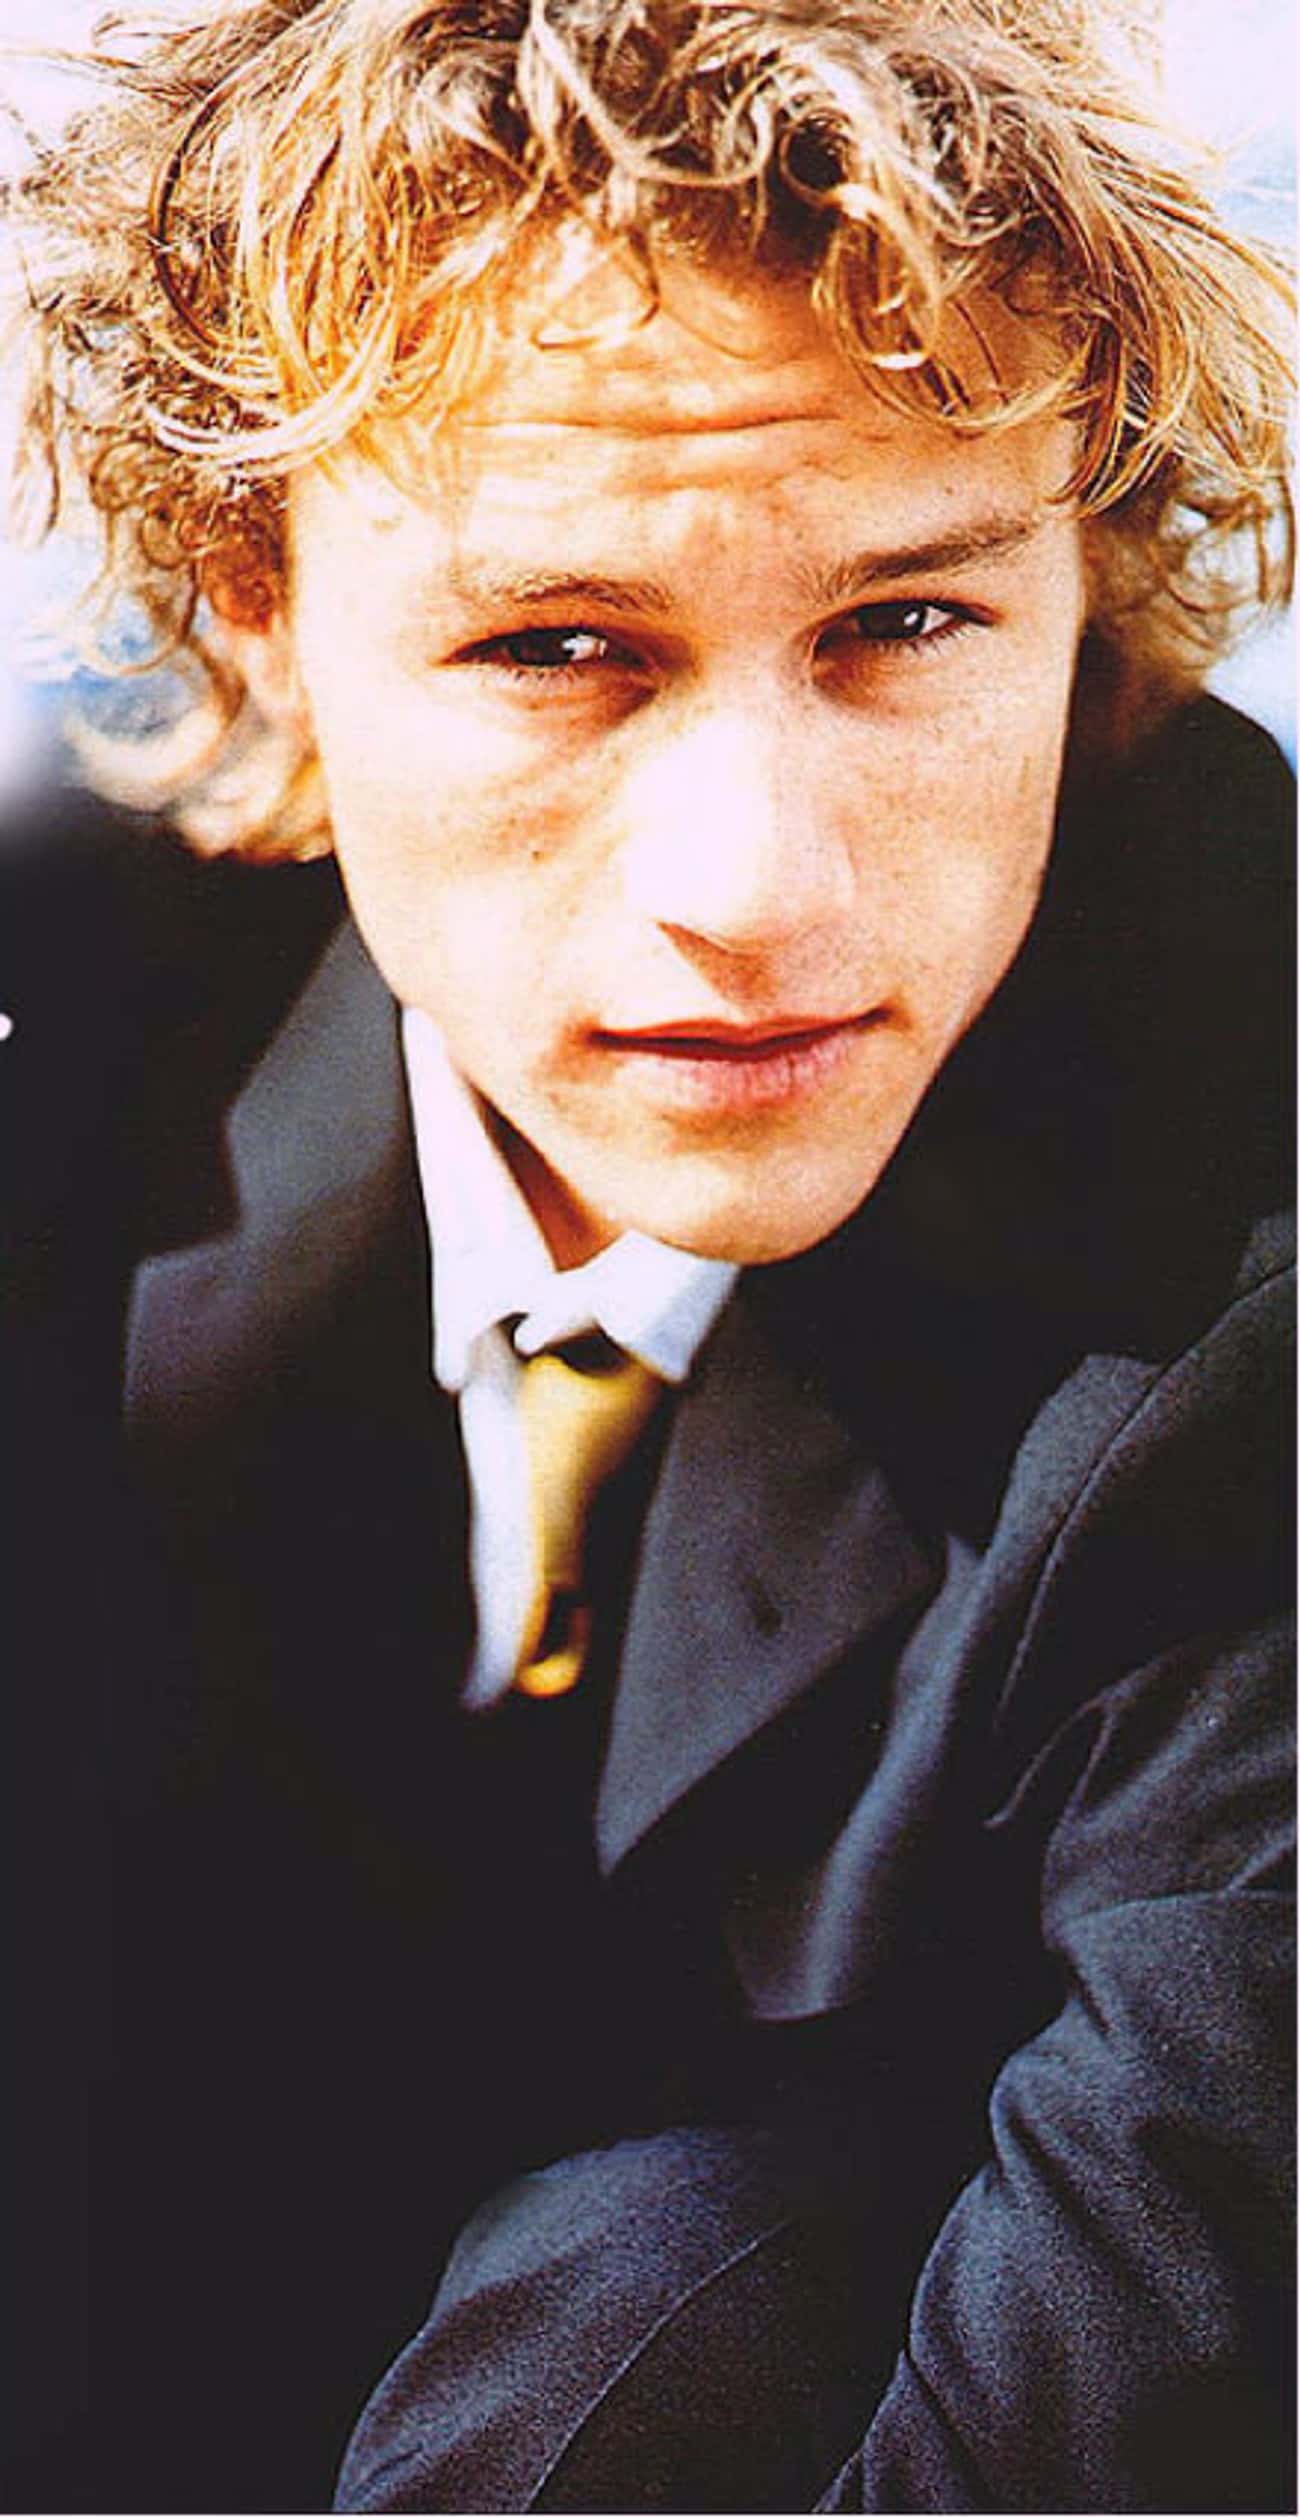 Young Heath Ledger in Black Suit and Tie